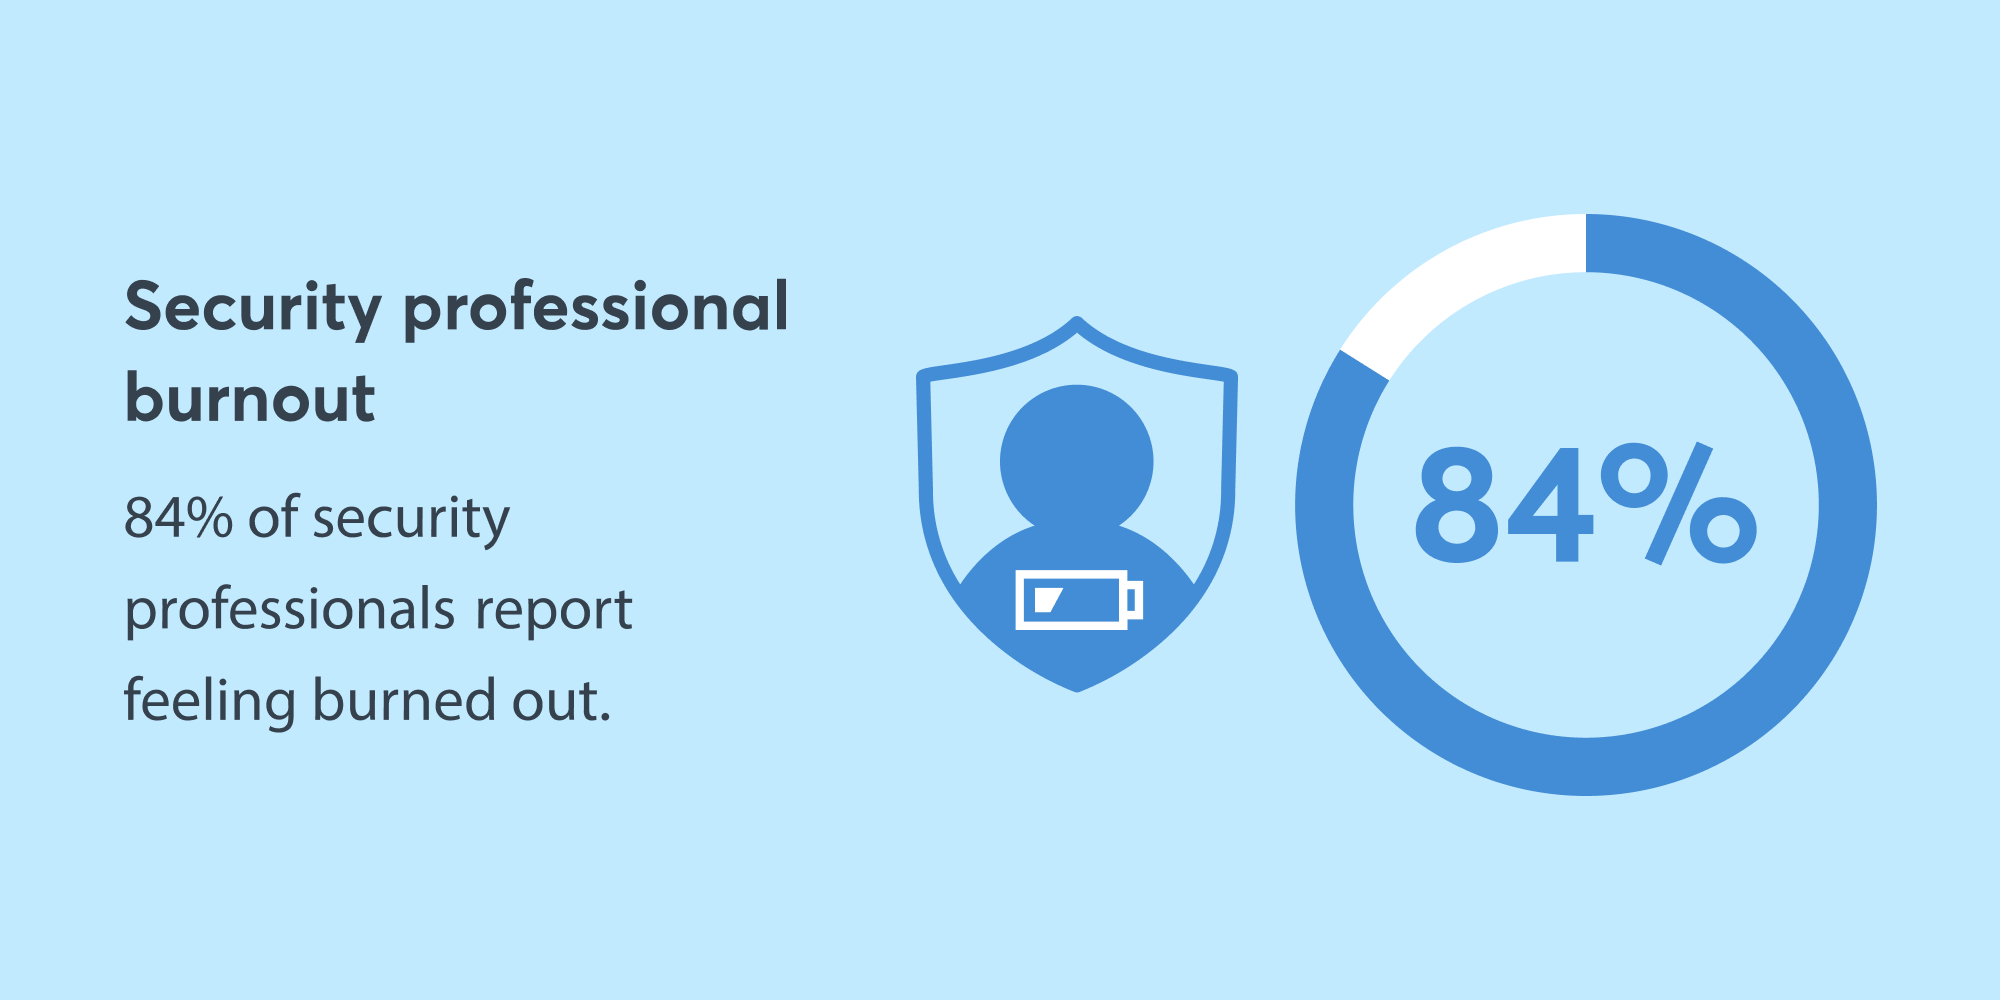 Security professional burnout: 84% of security professionals report feeling burned out. 